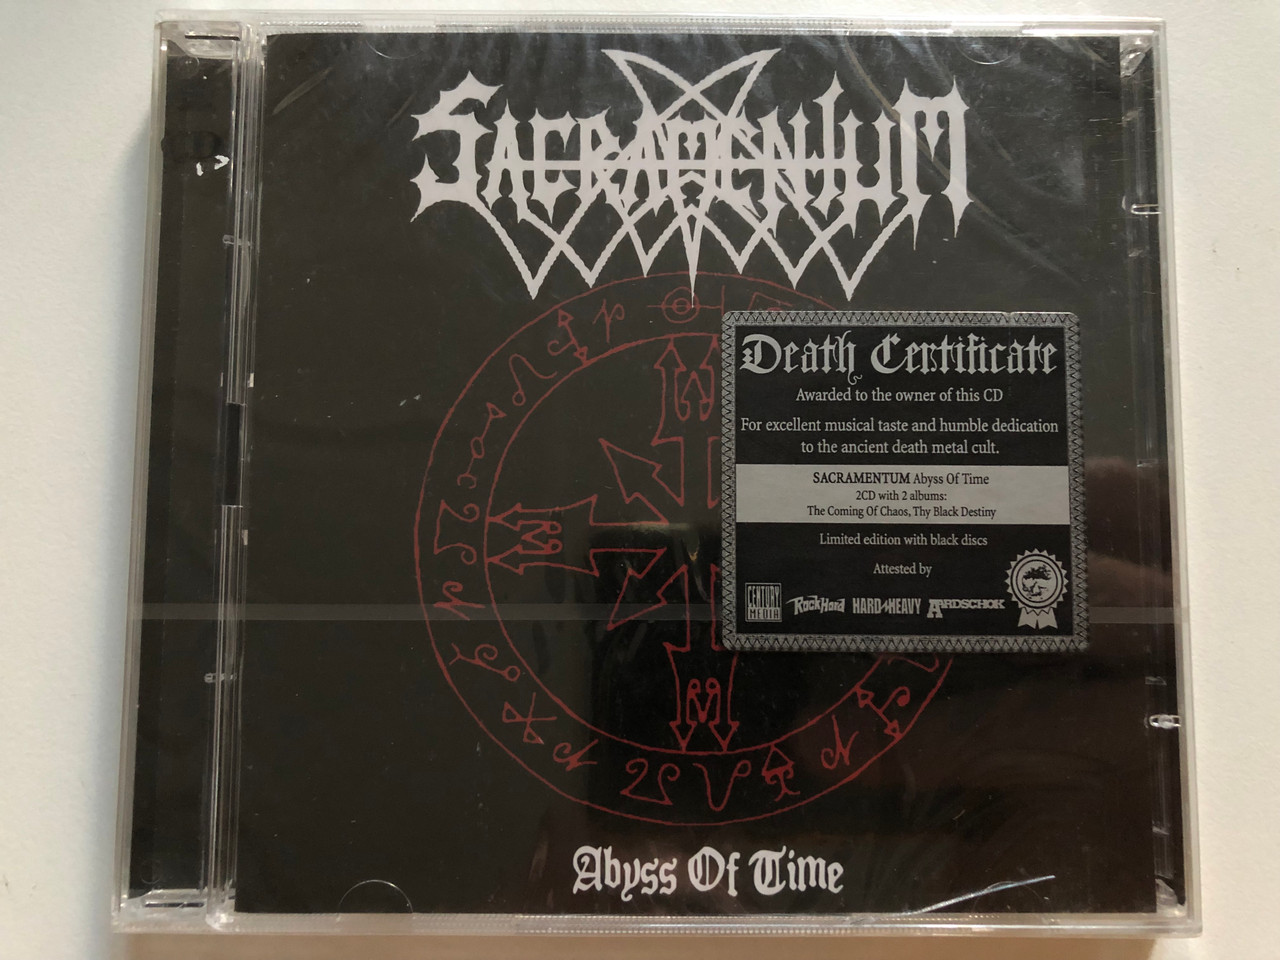 https://cdn10.bigcommerce.com/s-62bdpkt7pb/products/0/images/261038/Sacramentum_Abyss_Of_Time_Awarded_to_the_owner_of_this_CD._For_excellent_musical_taste_and_humble_dedication_to_the_ancient_death_metal_cult._Limited_Edition_with_black_discs_Century_Med_1__72707.1671118599.1280.1280.JPG?c=2&_gl=1*2otwku*_ga*MjA2NTIxMjE2MC4xNTkwNTEyNTMy*_ga_WS2VZYPC6G*MTY3MTEwOTAxNi42NzMuMS4xNjcxMTE4NDE2LjI5LjAuMA..